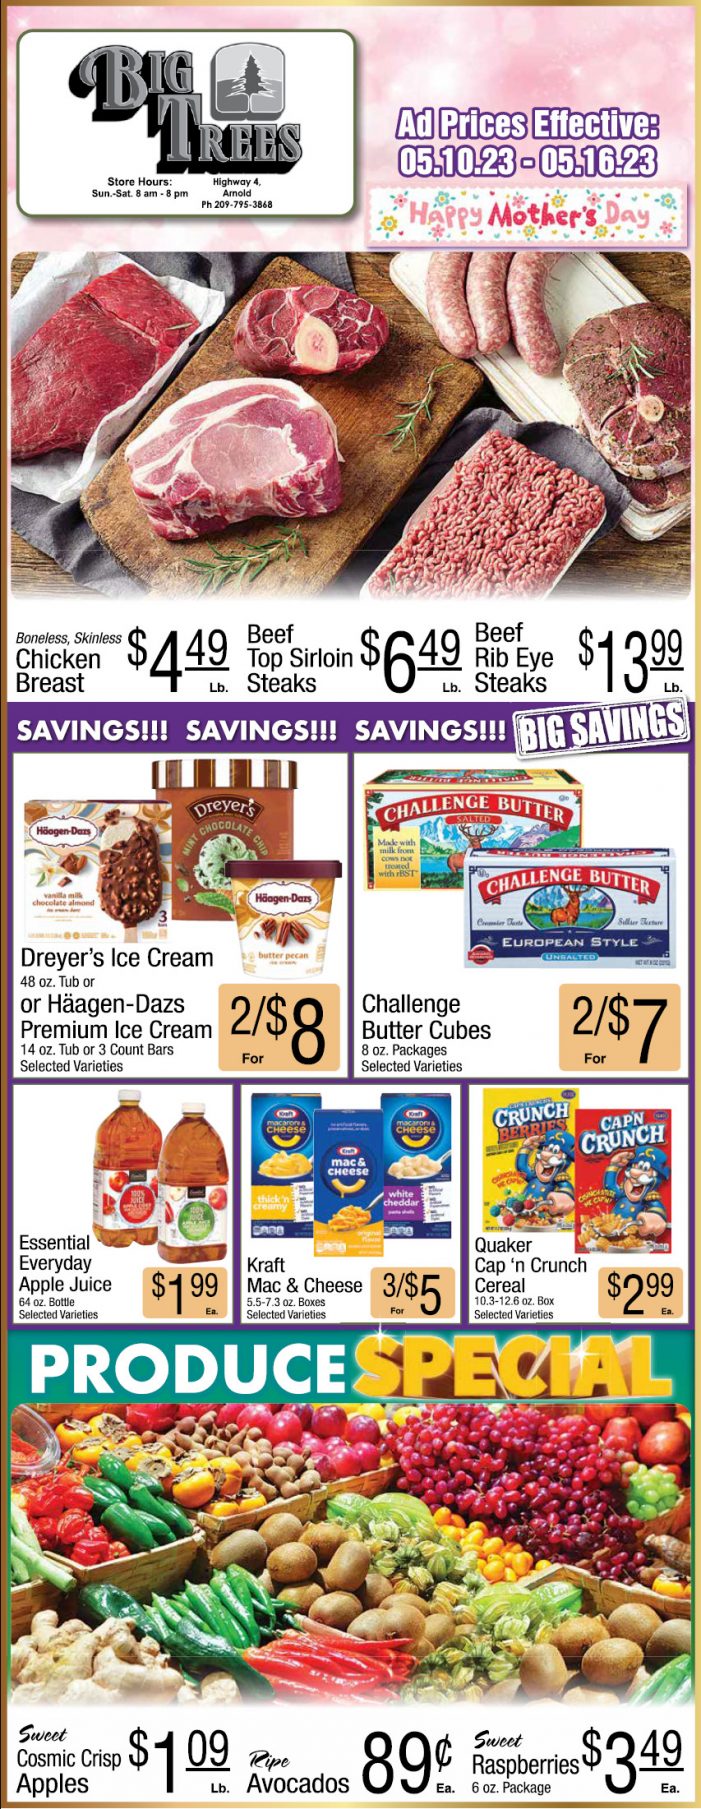 Big Trees Market Weekly Ad, Grocery, Produce, Meat & Deli Specials May 10 – 16!  Shop Local & Save!